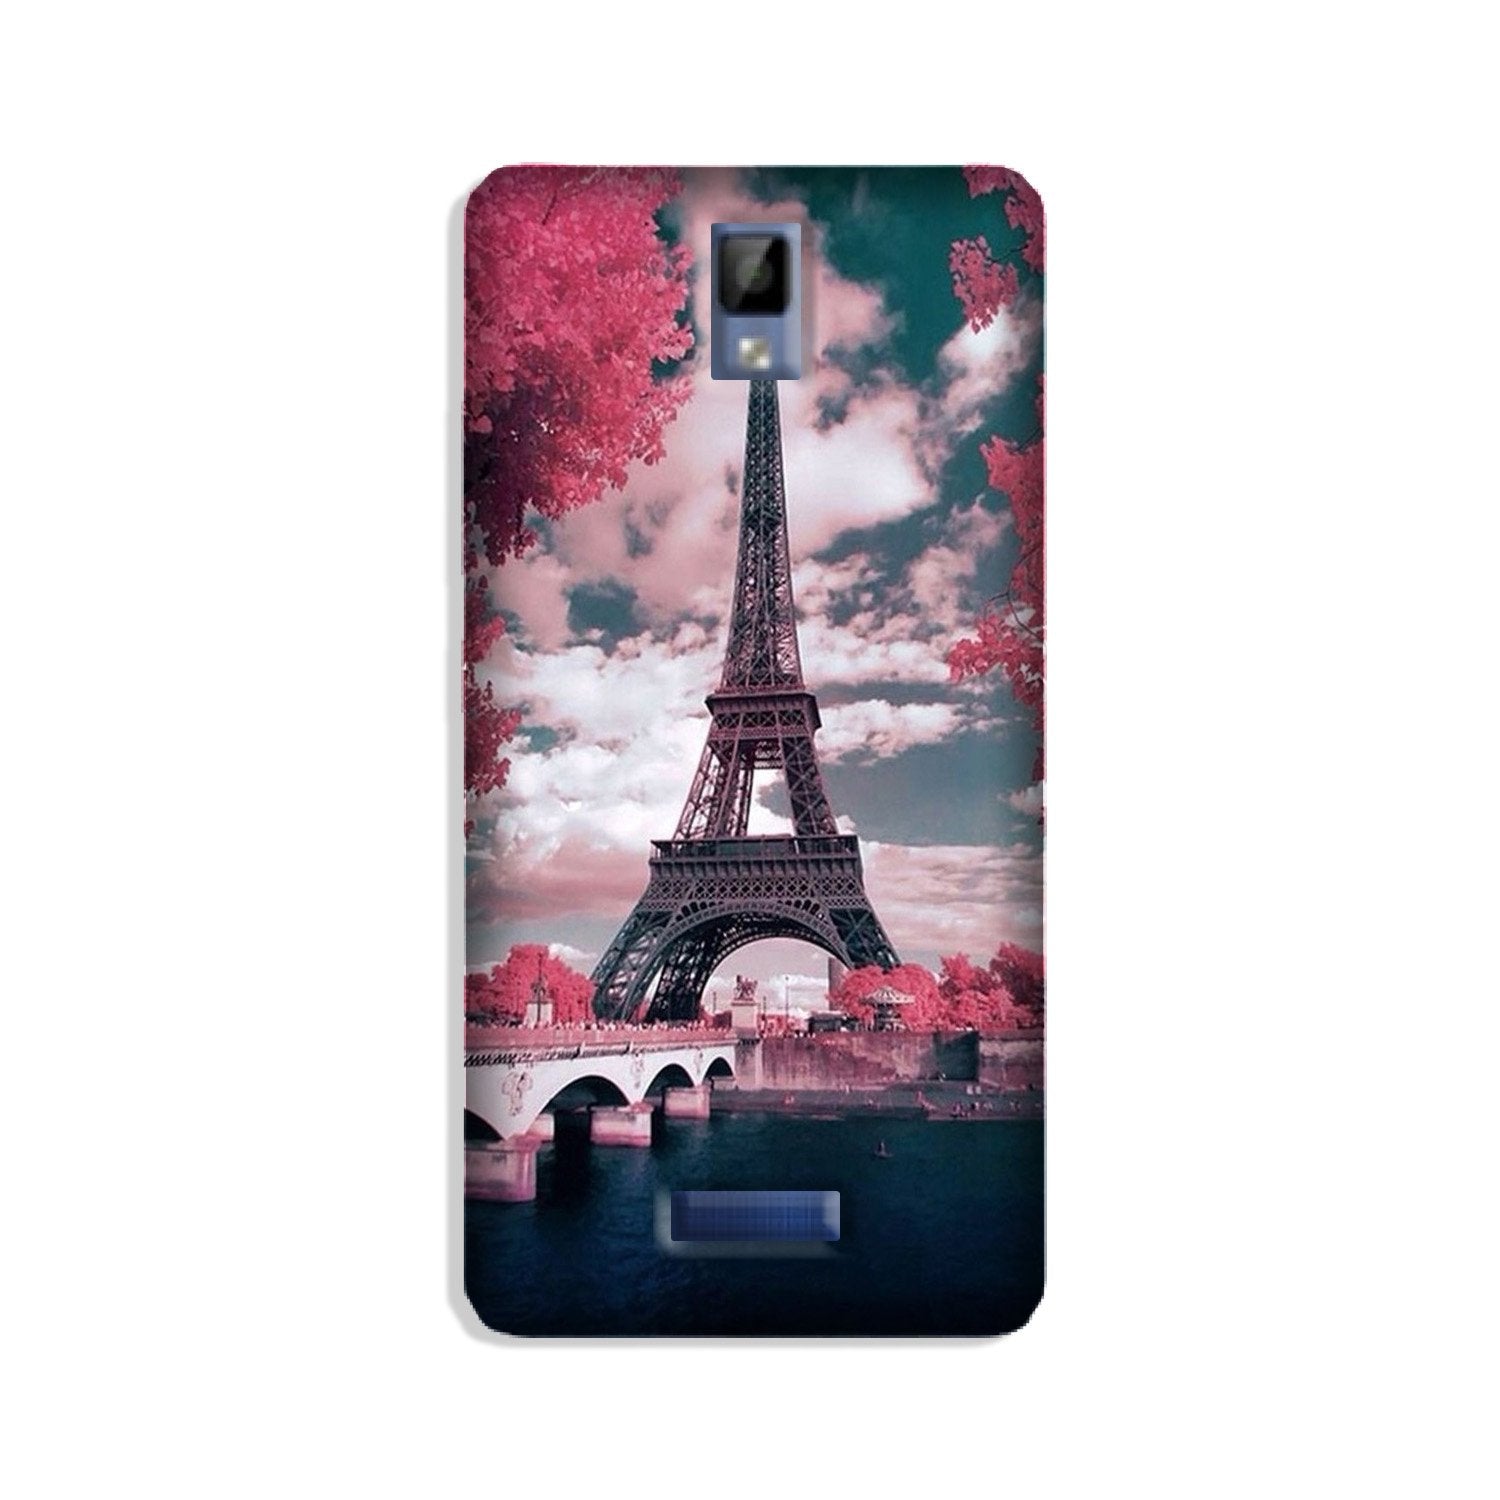 Eiffel Tower Case for Gionee P7(Design - 101)